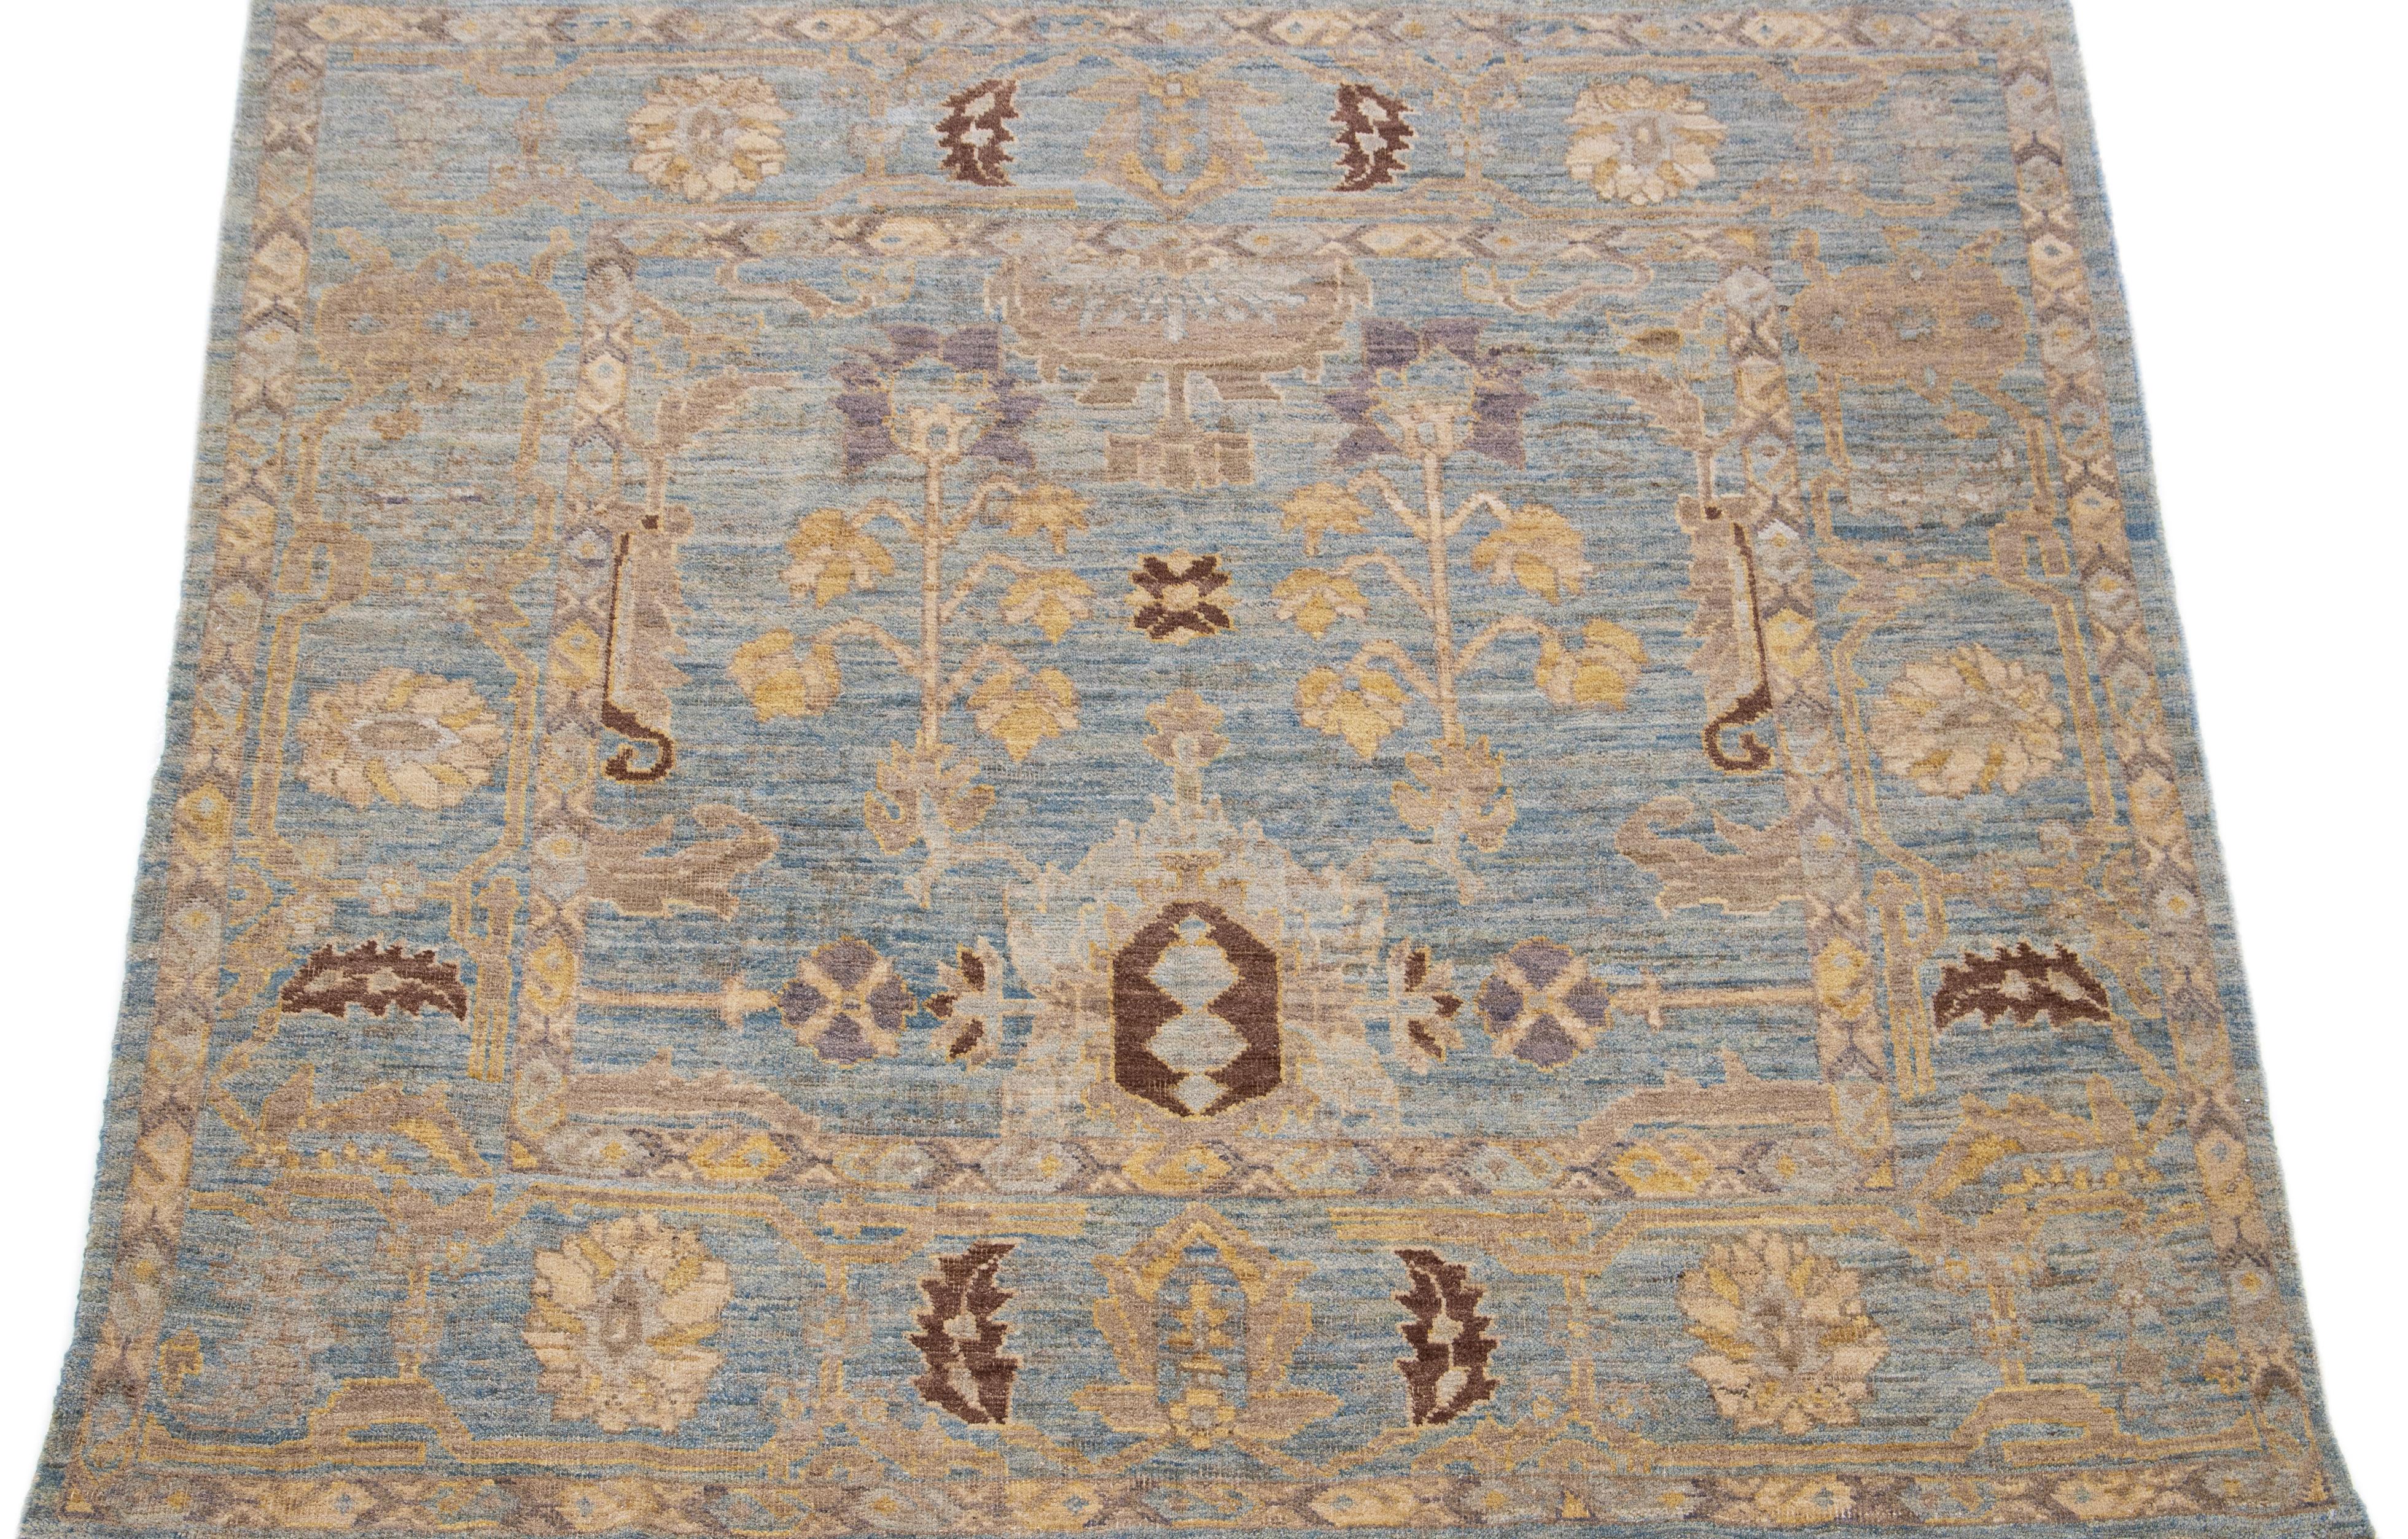 Beautiful modern Sultanabad hand-knotted wool rug with a blue color field. This rug has a designed frame with brown and yellow accents in a gorgeous all-over floral motif.

This rug measures 6' x 6'3